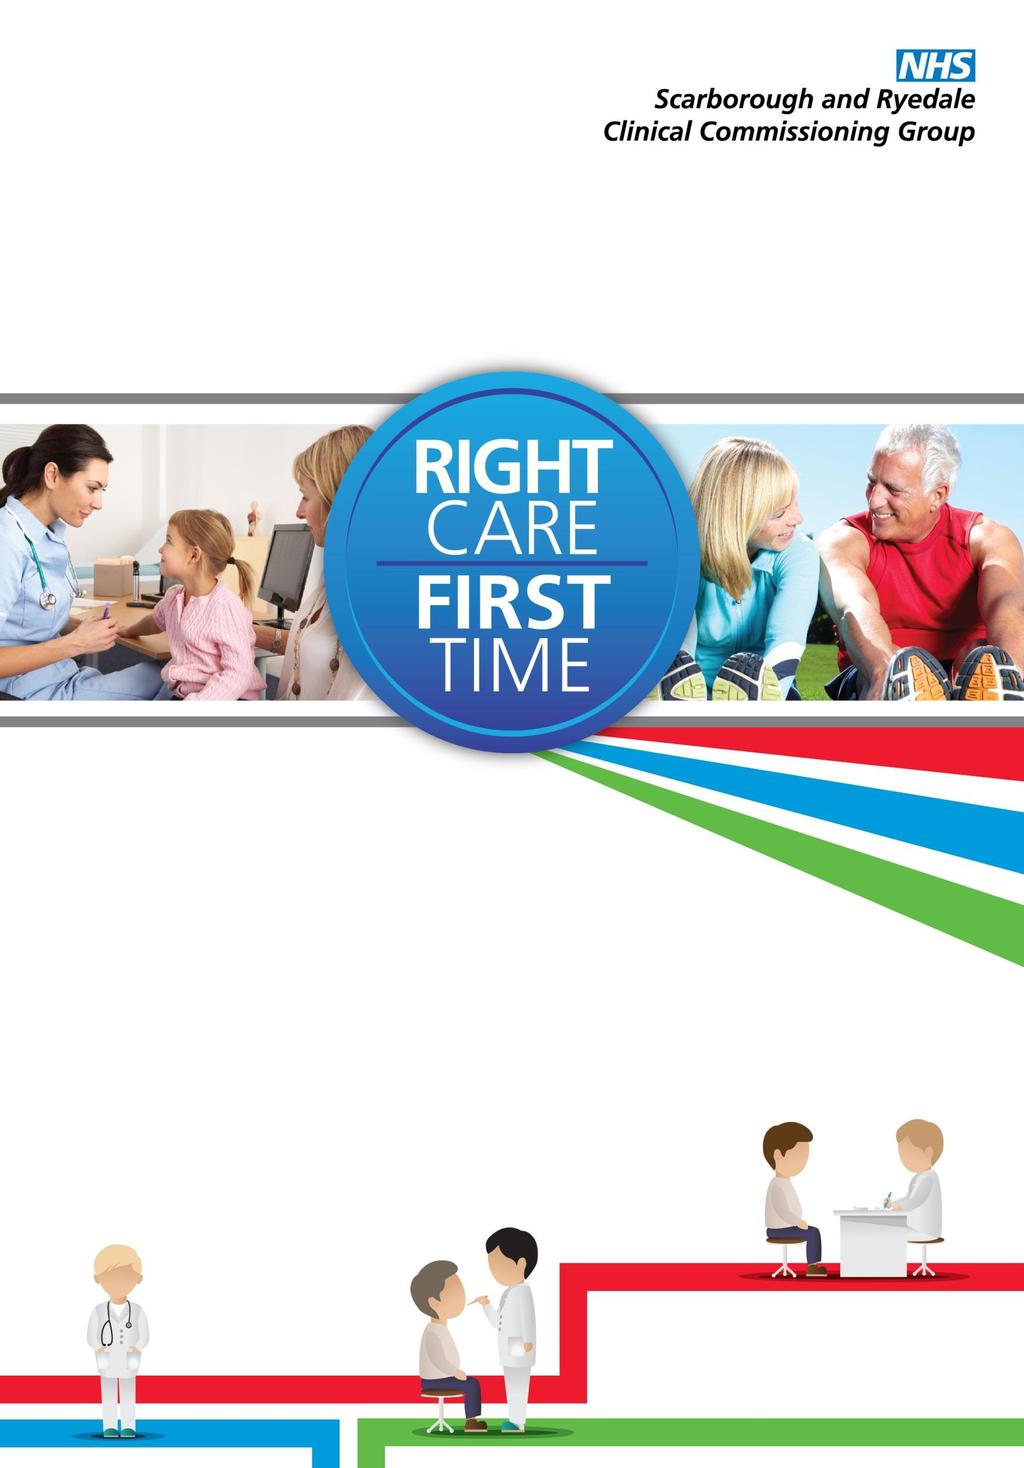 Right care, first time: Developing a new, integrated model for urgent care services in Scarborough and Ryedale Feedback report from